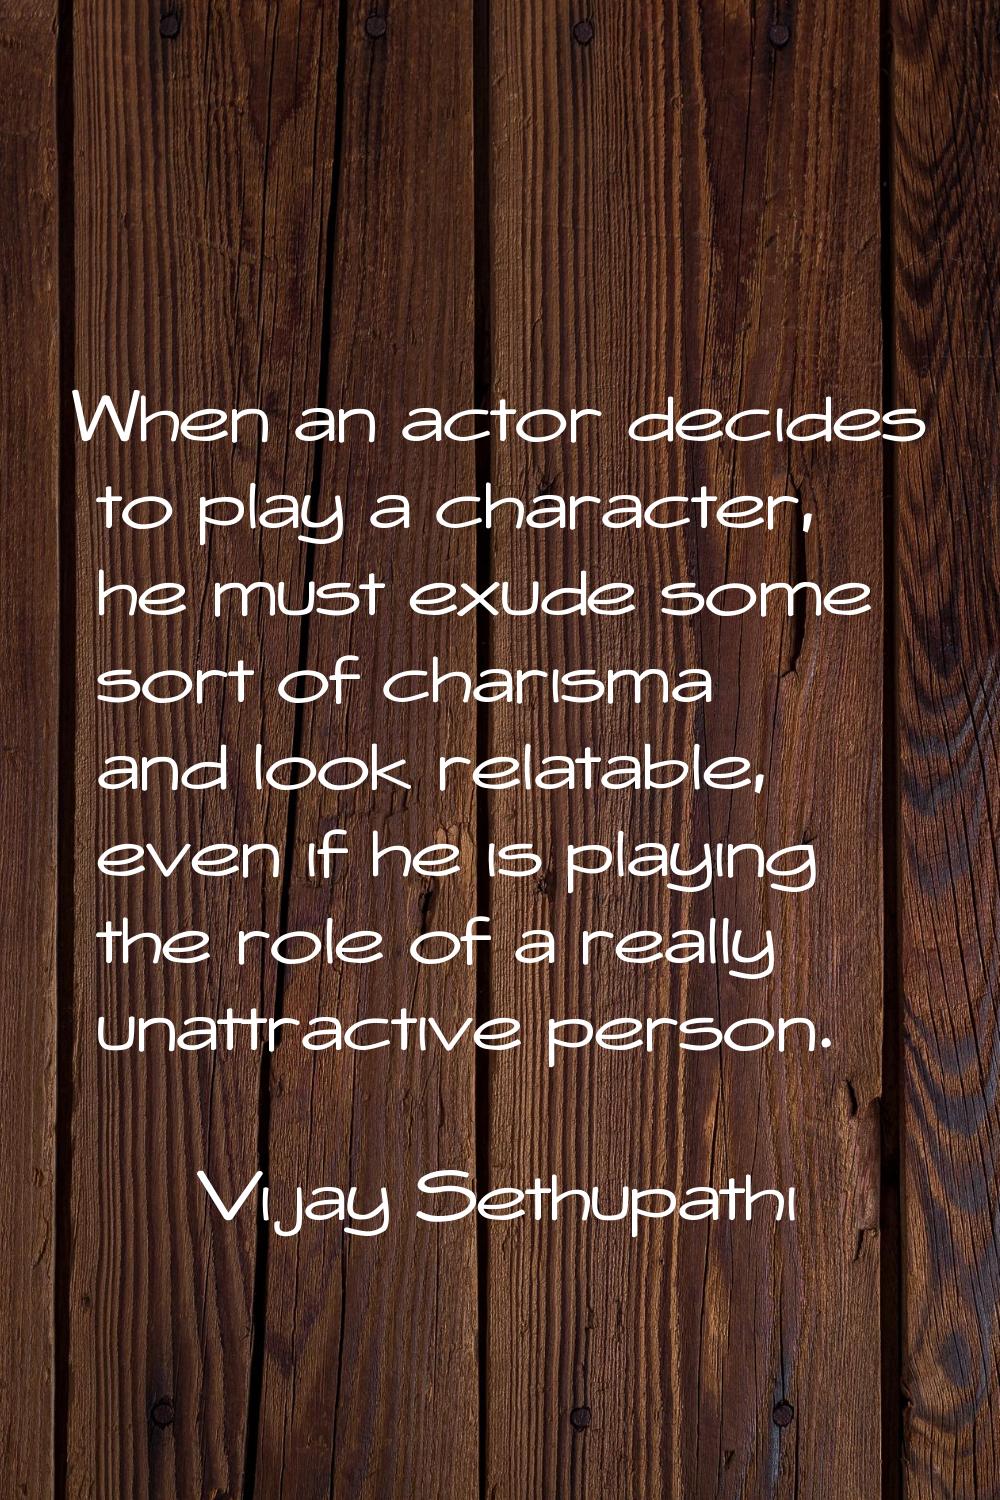 When an actor decides to play a character, he must exude some sort of charisma and look relatable, 